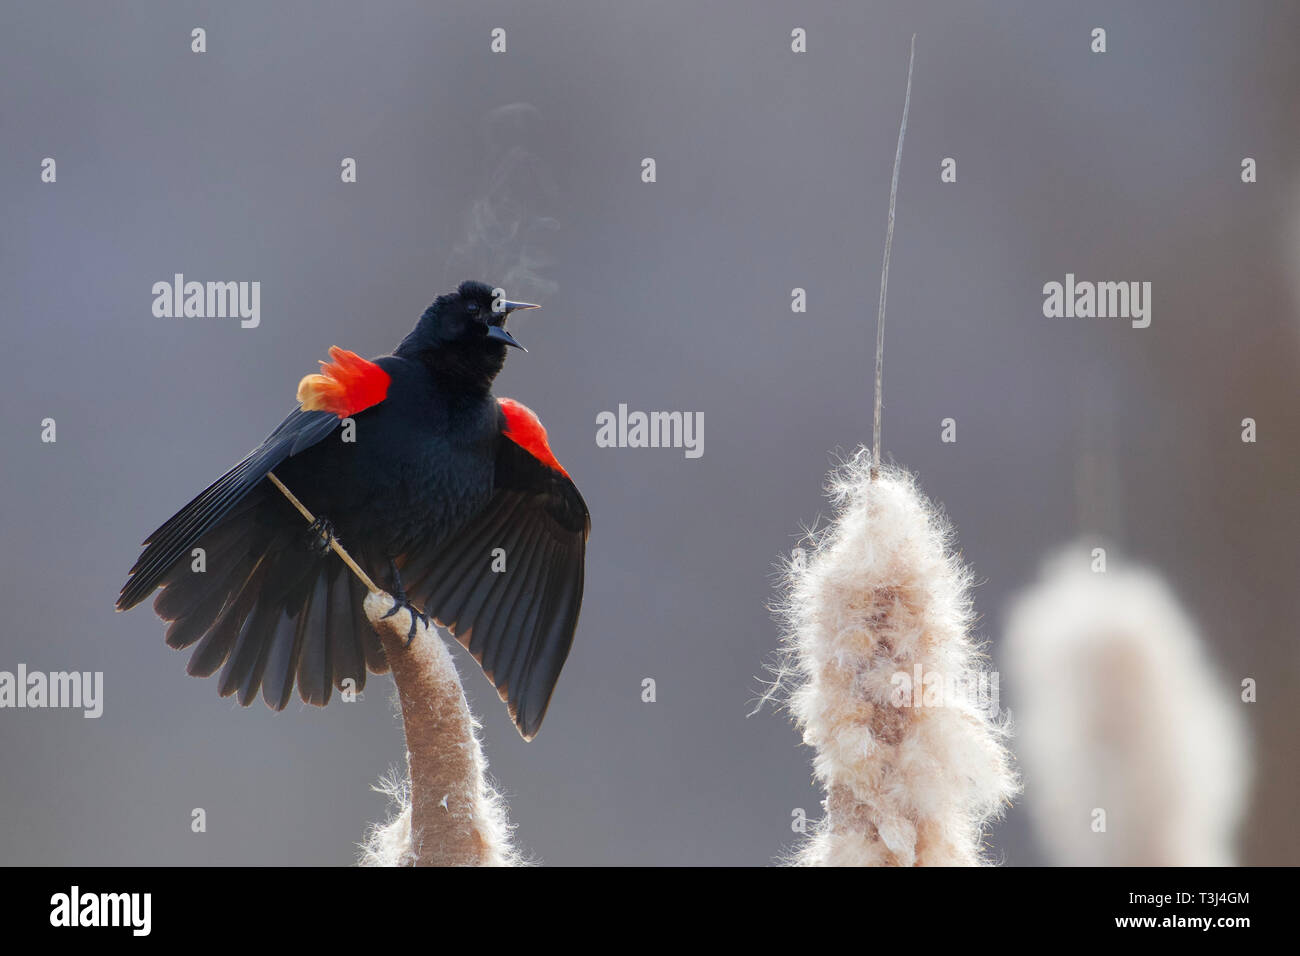 Red-winged Blackbird performing mating display and song on cattails in wetland marsh habitat, with steam from his breath visible Stock Photo